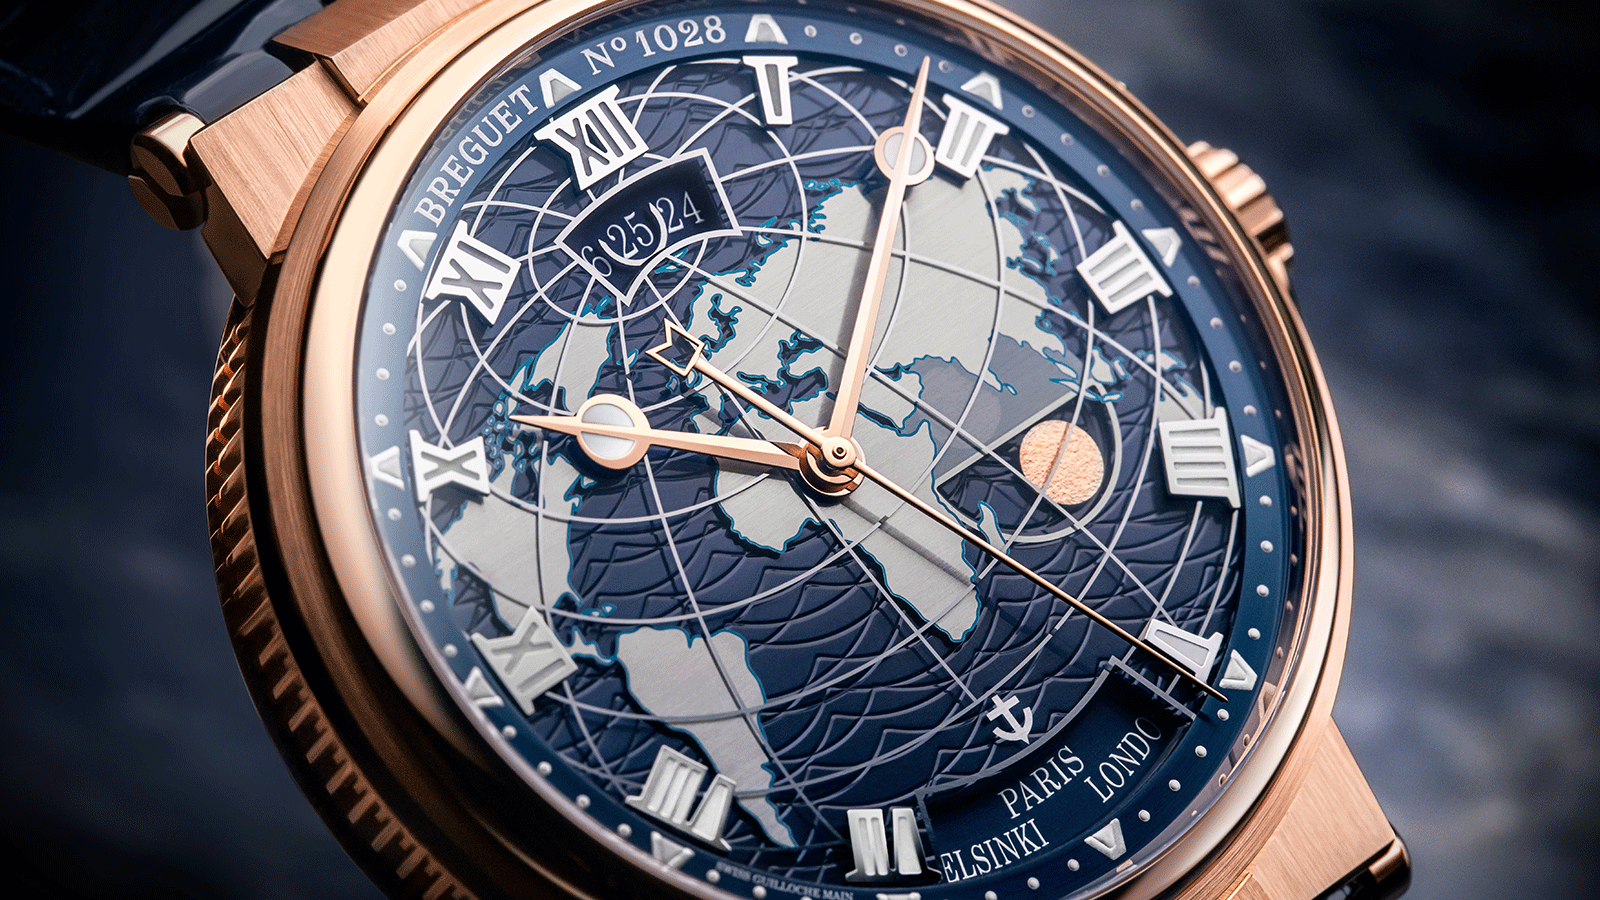 Marine Hora Mundi 5557 - Travel at a click. The Hora Mundi became an instant hit at the time of its launch. This mechanical watch, which had taken three years to develop and been awarded four patents, featured a critical asset in the shape of an instant-change dual-time display.